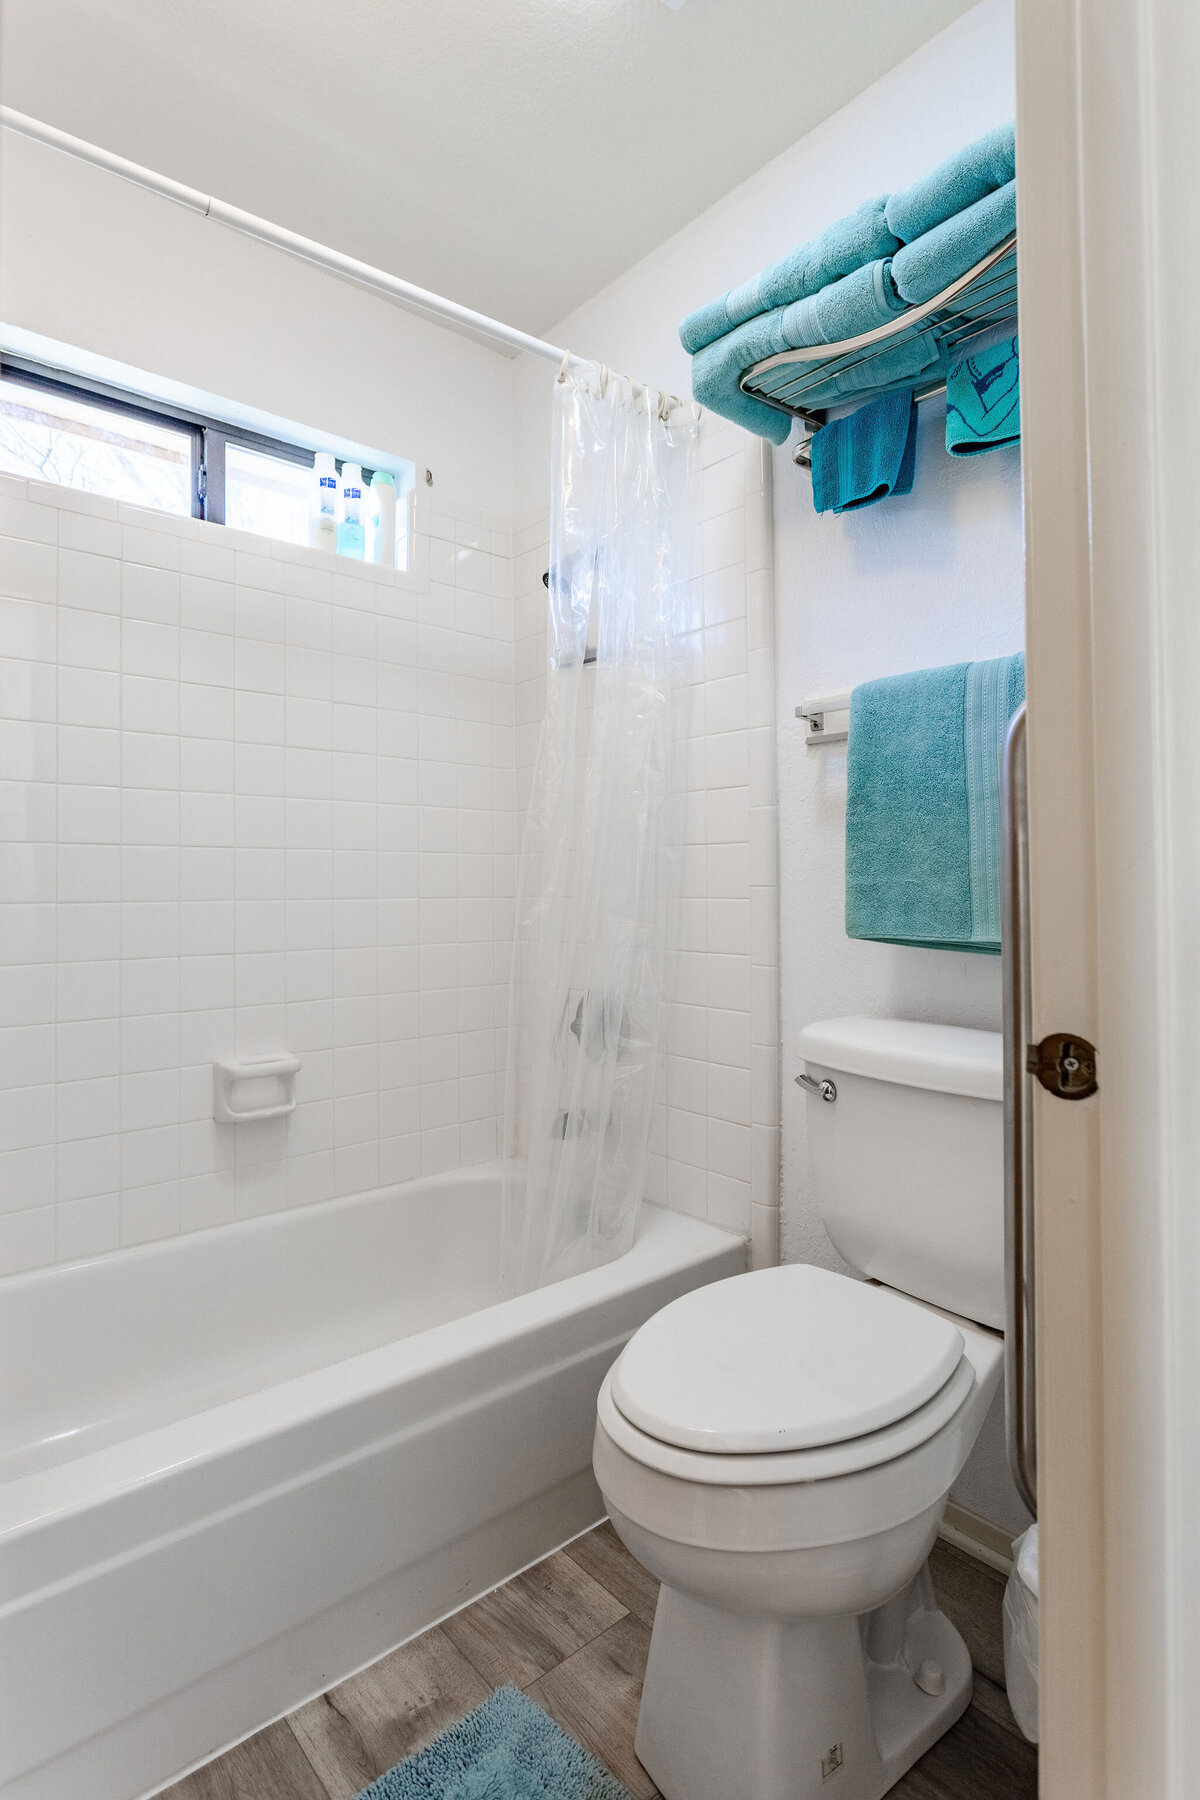 Bathroom with shower and bathtub in this 2-bedroom, 2-bathroom lakeside vacation rental home for 6 guests on Tradinghouse Lake with privacy access to a fishing dock and boat launch pad, ping pong table, gazebo, free wifi and free parking in Waco, TX.